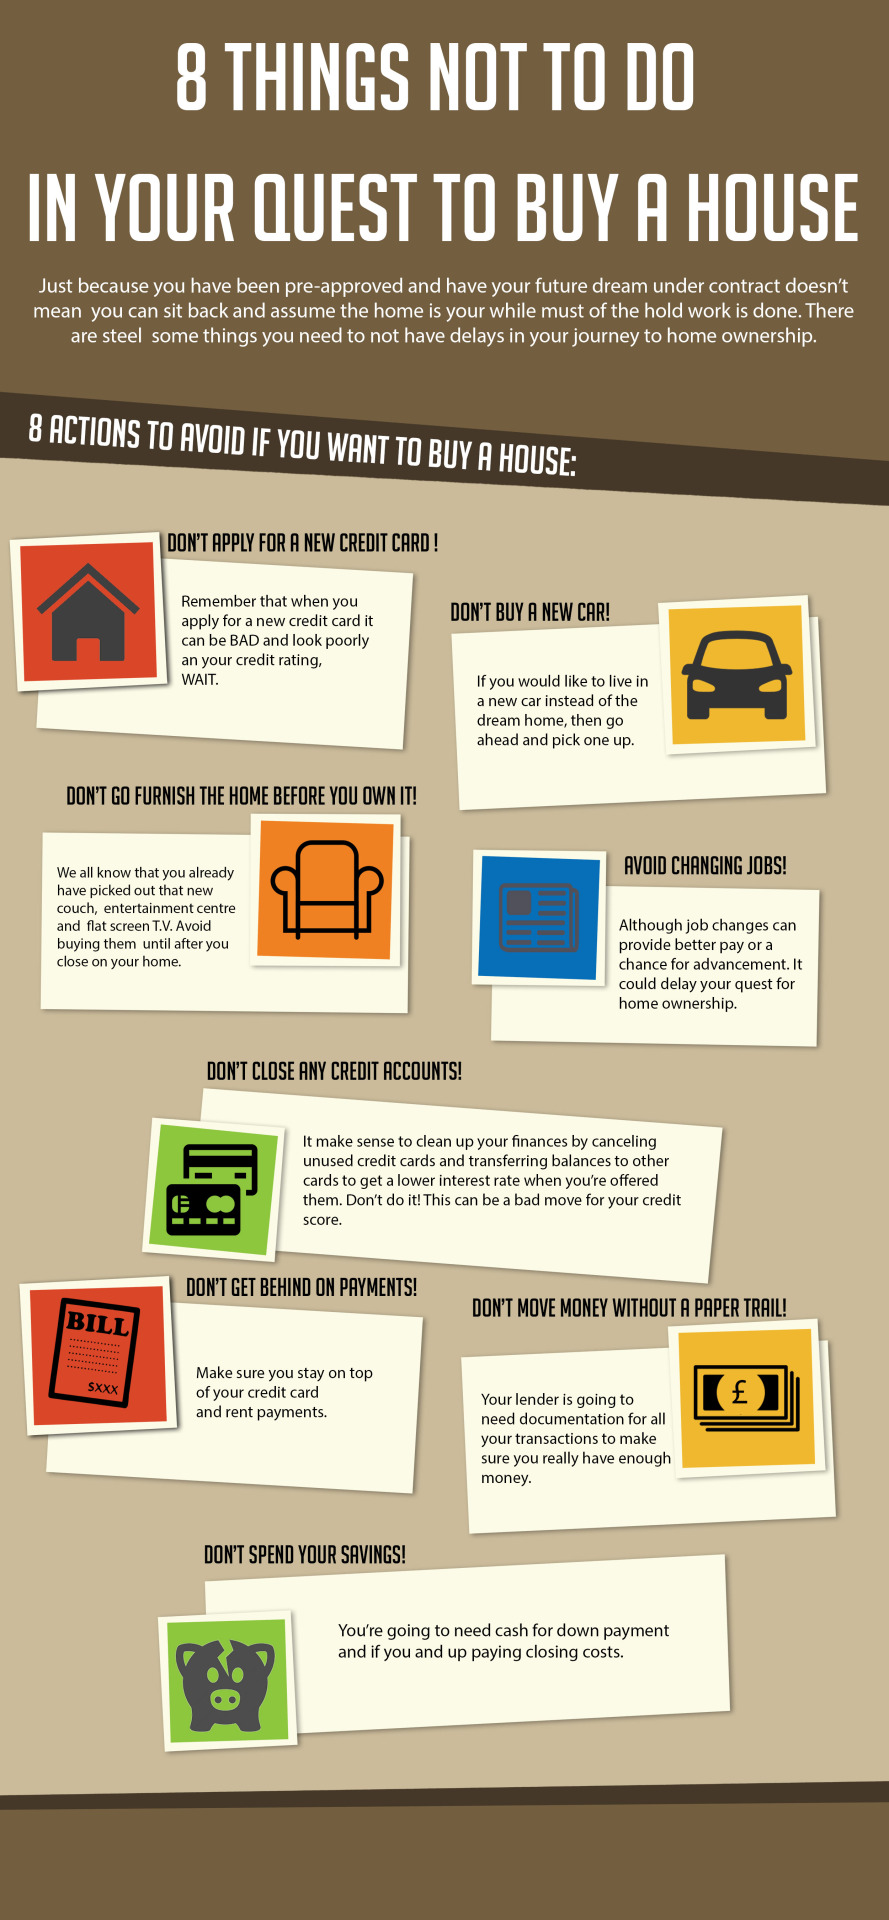 things-not-to-do-to-buy-a-house-infographic-plaza